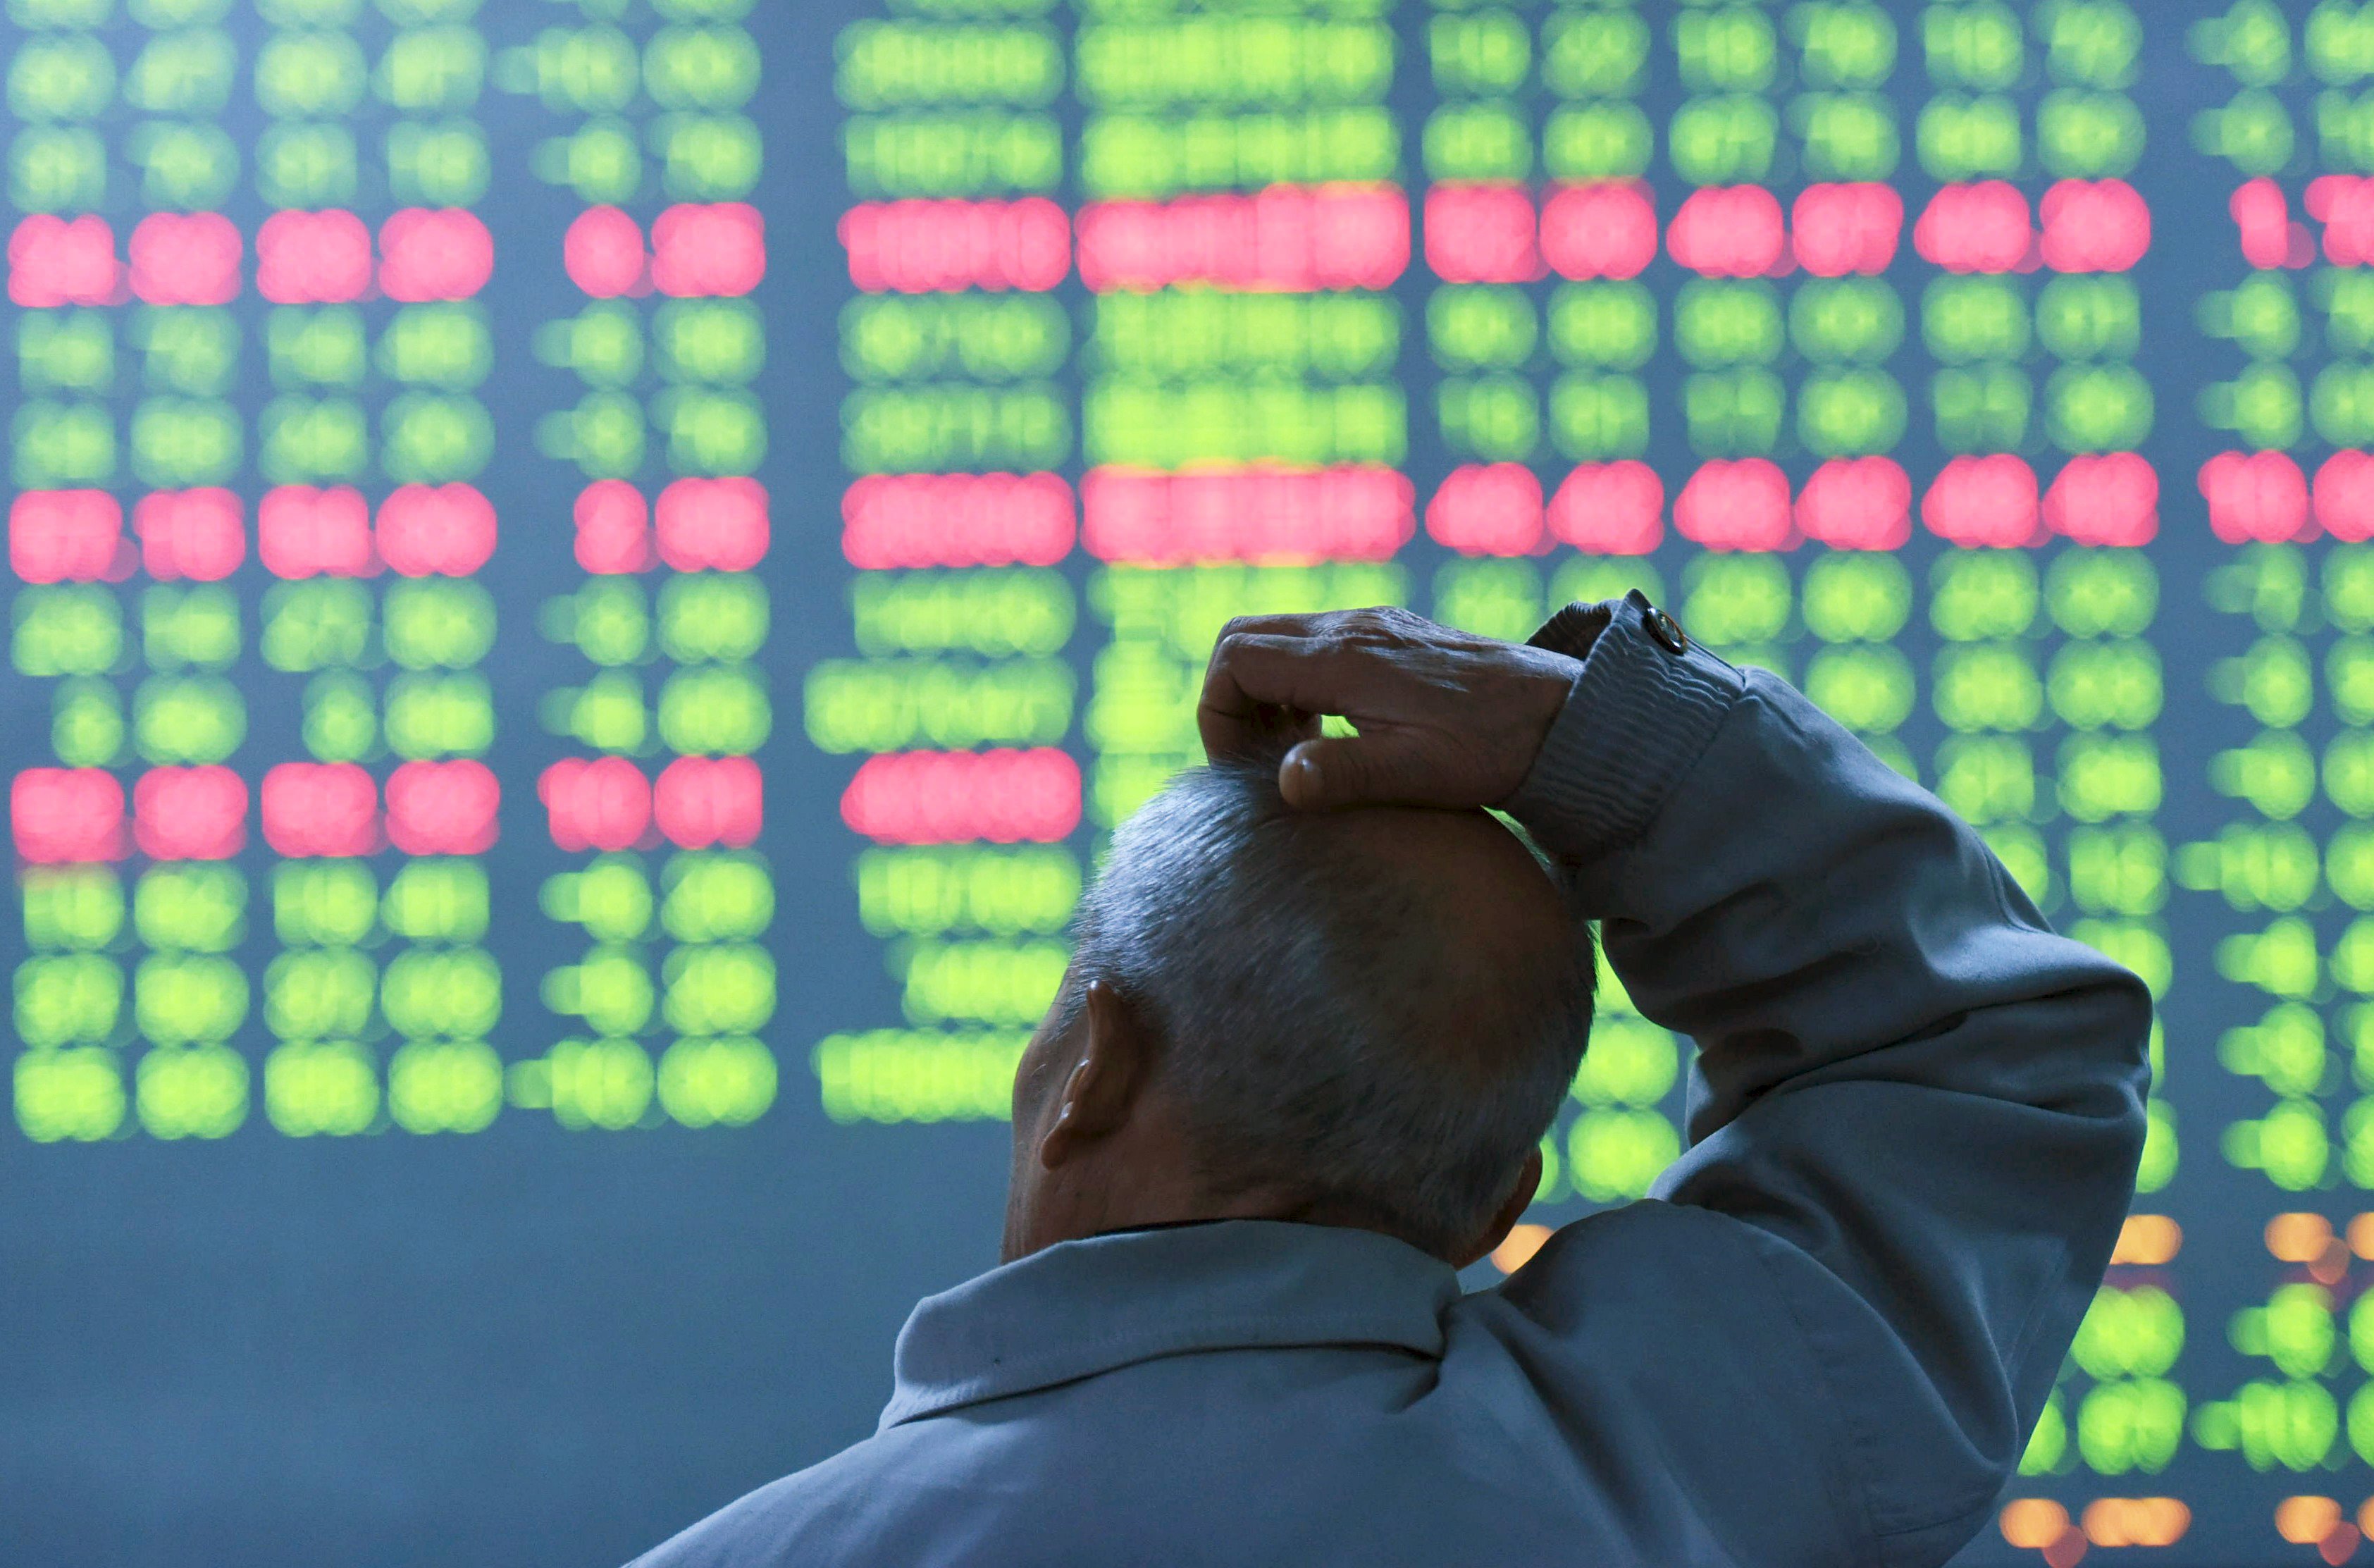 An investor looks at an electronic screen showing stock information at brokerage house in Hangzhou, Zhejiang Province, China, in this January 11, 2016 file photo. China-focused funds in Hong Kong are adopting measures to improve how they cope with liquidity shocks from Chinese markets after the securities regulator found some investors were unfairly treated during last year's market rout. REUTERS/China Daily/FilesATTENTION EDITORS - THIS PICTURE WAS PROVIDED BY A THIRD PARTY. THIS PICTURE IS DISTRIBUTED EXACTLY AS RECEIVED BY REUTERS, AS A SERVICE TO CLIENTS. CHINA OUT. NO COMMERCIAL OR EDITORIAL SALES IN CHINA.